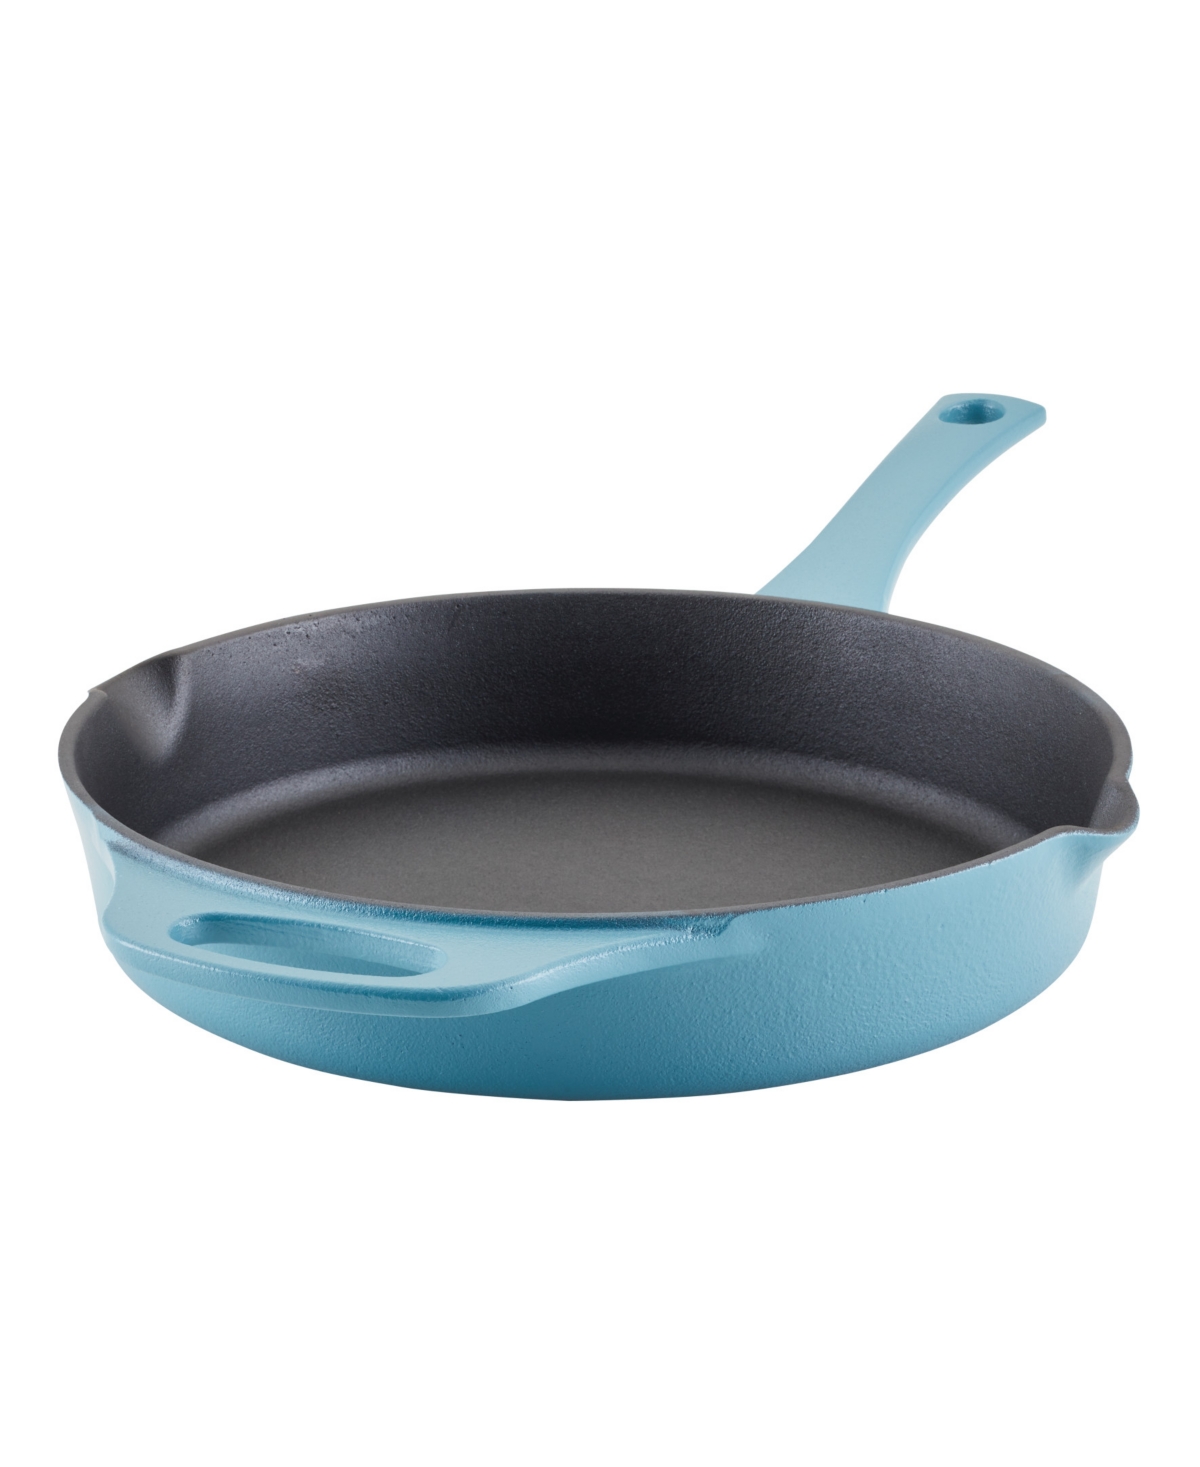 Rachael Ray Nitro Cast Iron 10" Skillet In Agave Blue